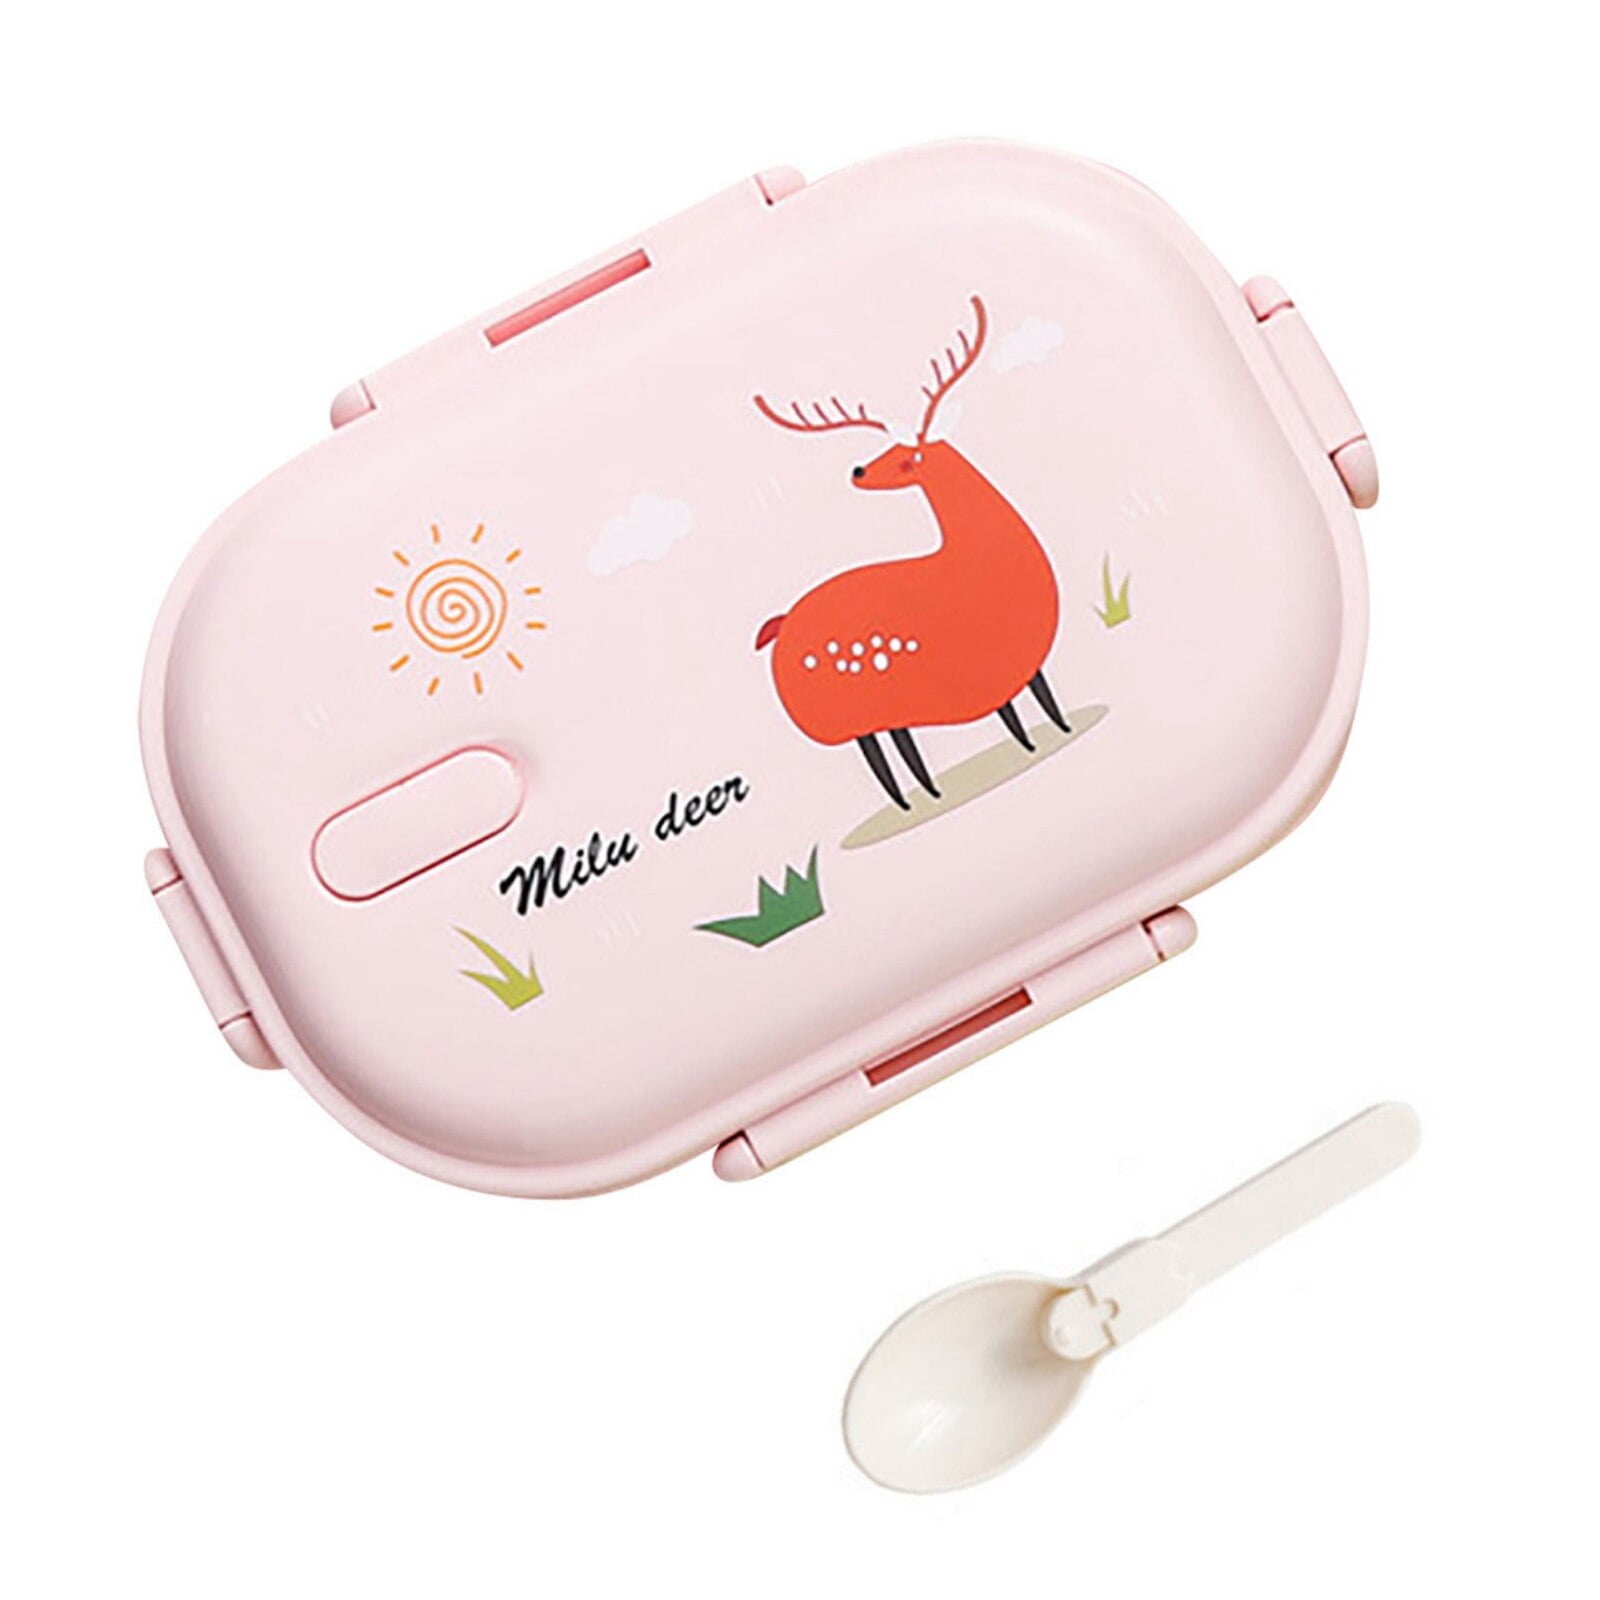 Ylebs Bento Box Lunch Containers for Adults 5 Cup,Bento Boxes with 4  Compartments &Fork,Leak-proof,Microwave/Dishwasher/Freezer Safe,Pink